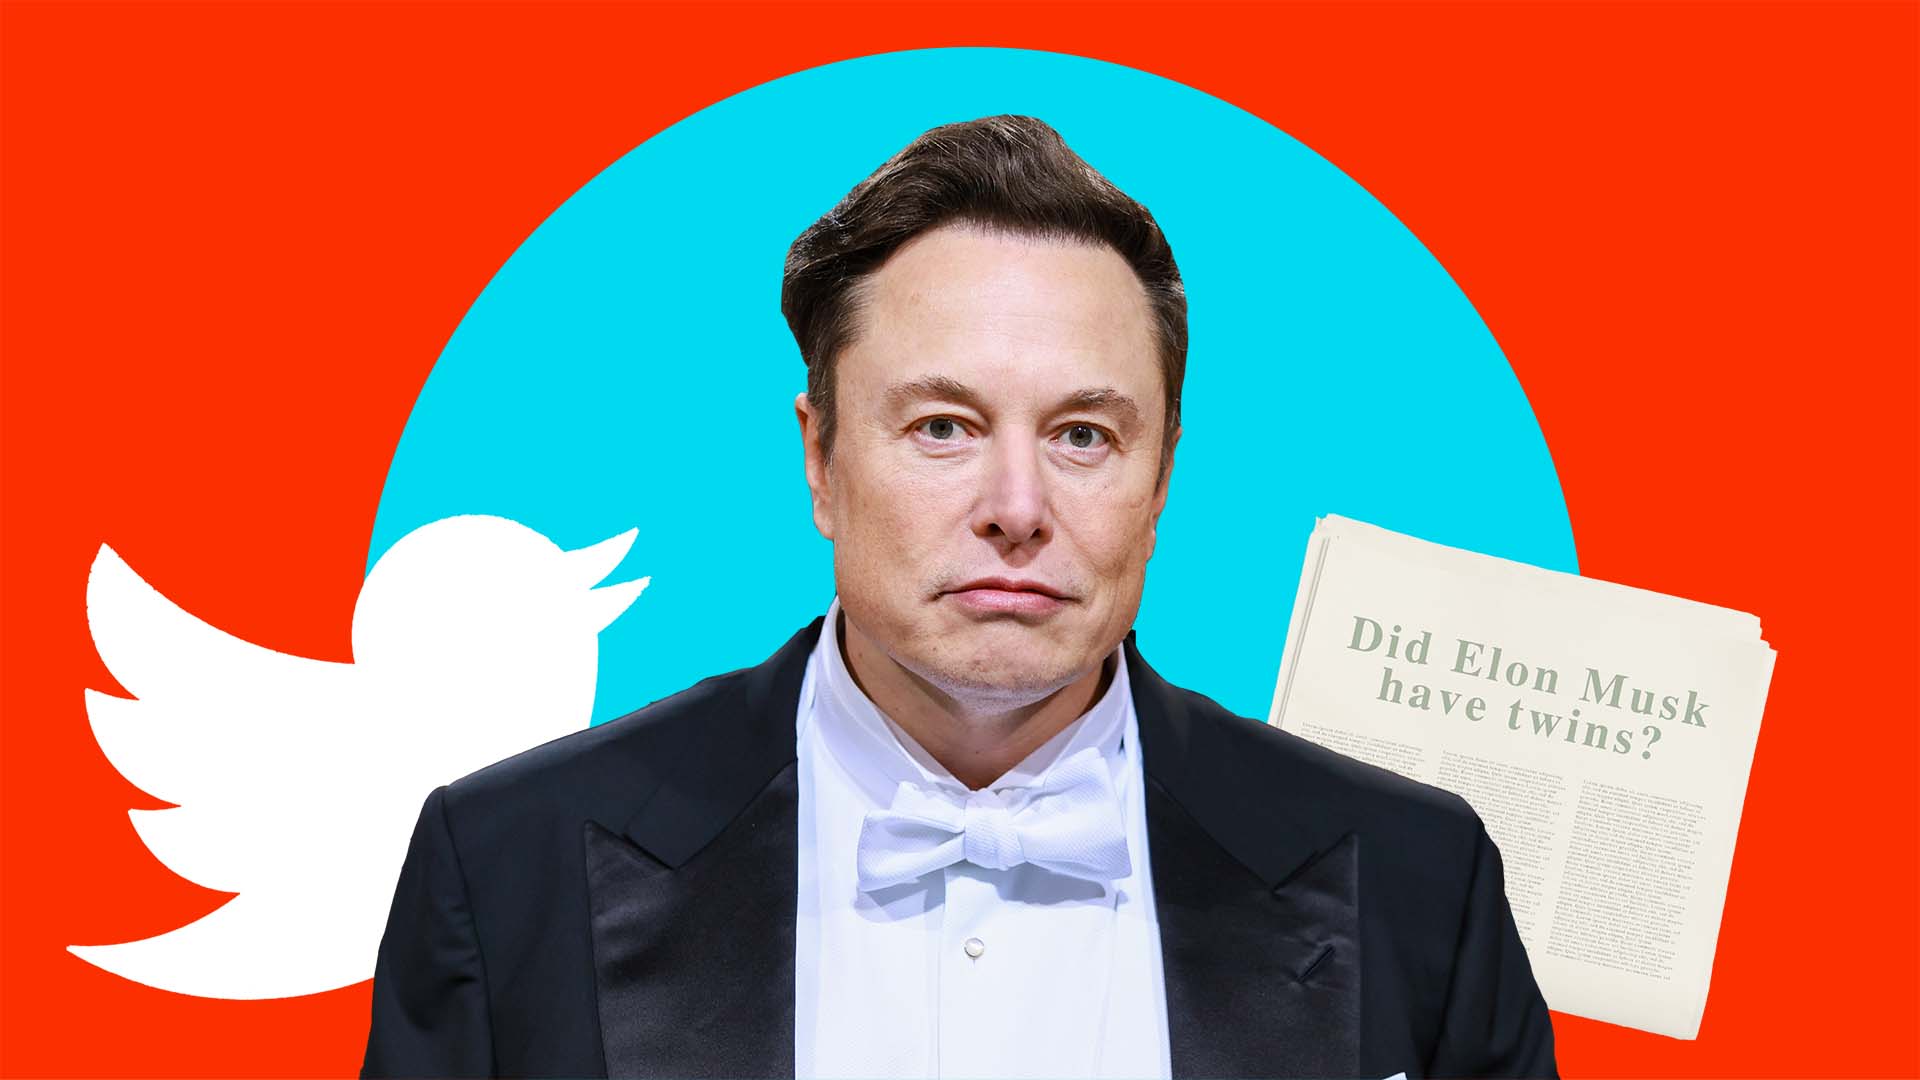 Elon Musk Just Proved Why CEOs Should Not Have Absolute Power